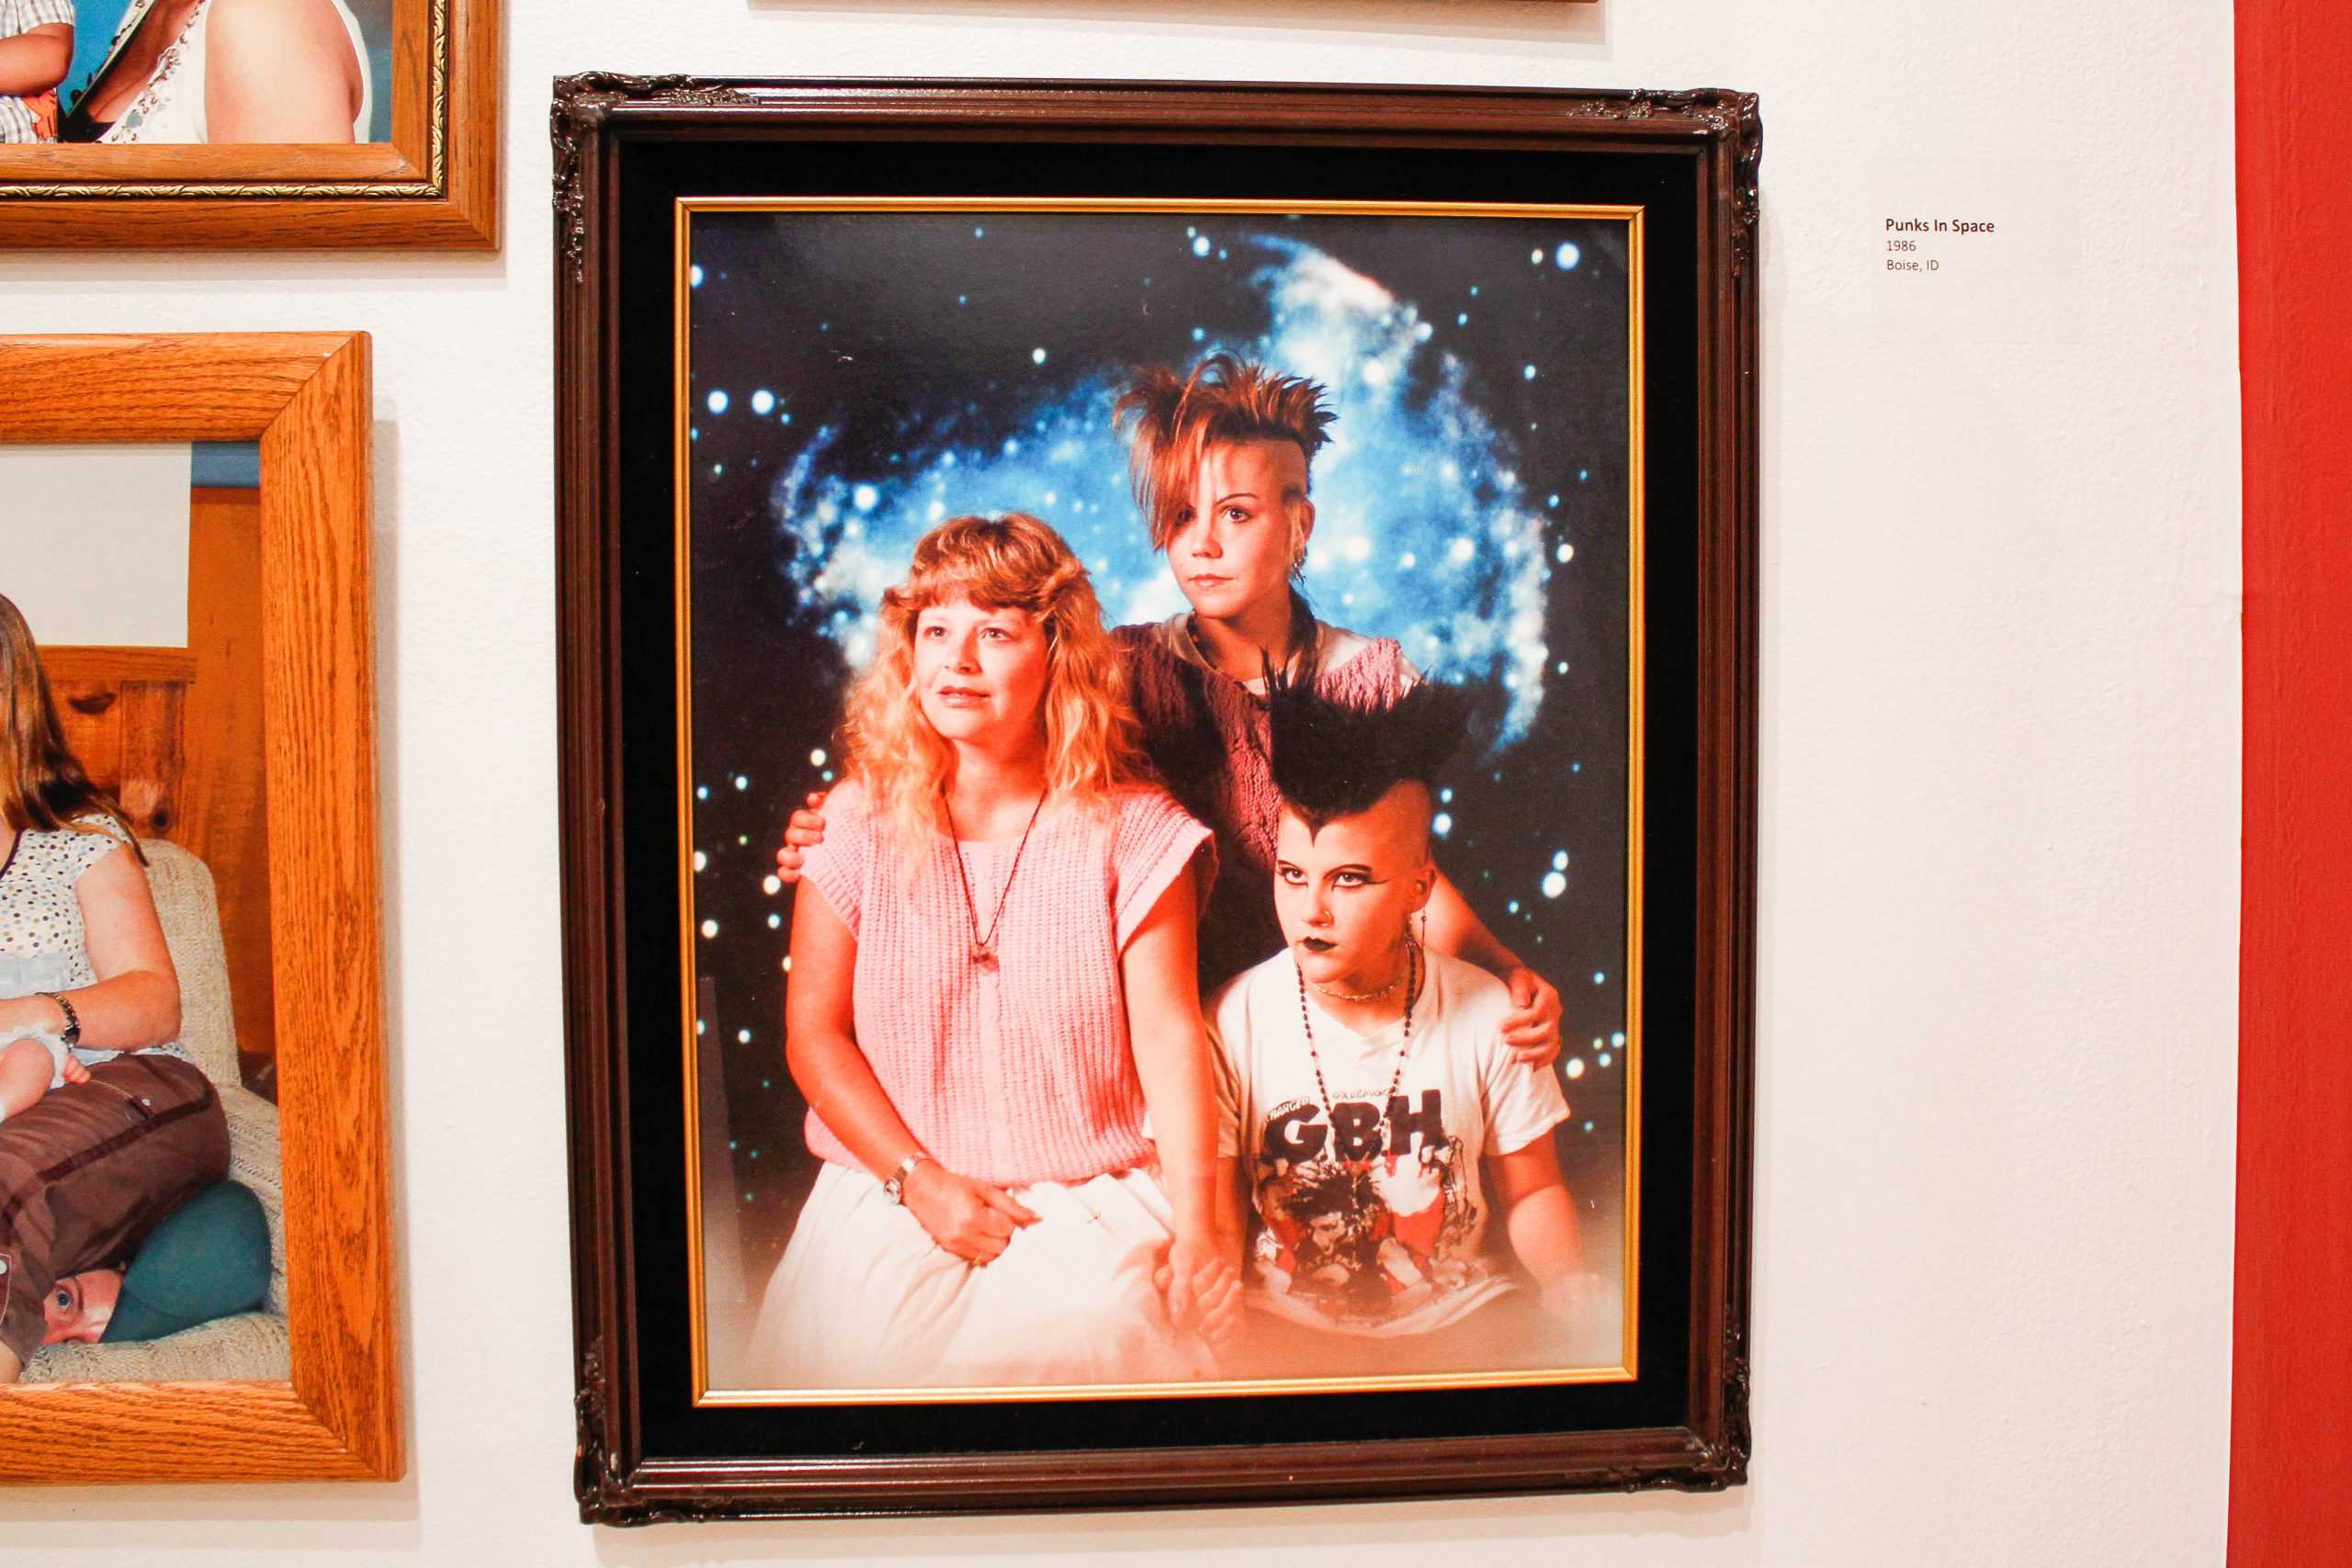 Awkward+Family+Photos+brings+humor+to+Fort+Collins+Art+Museum